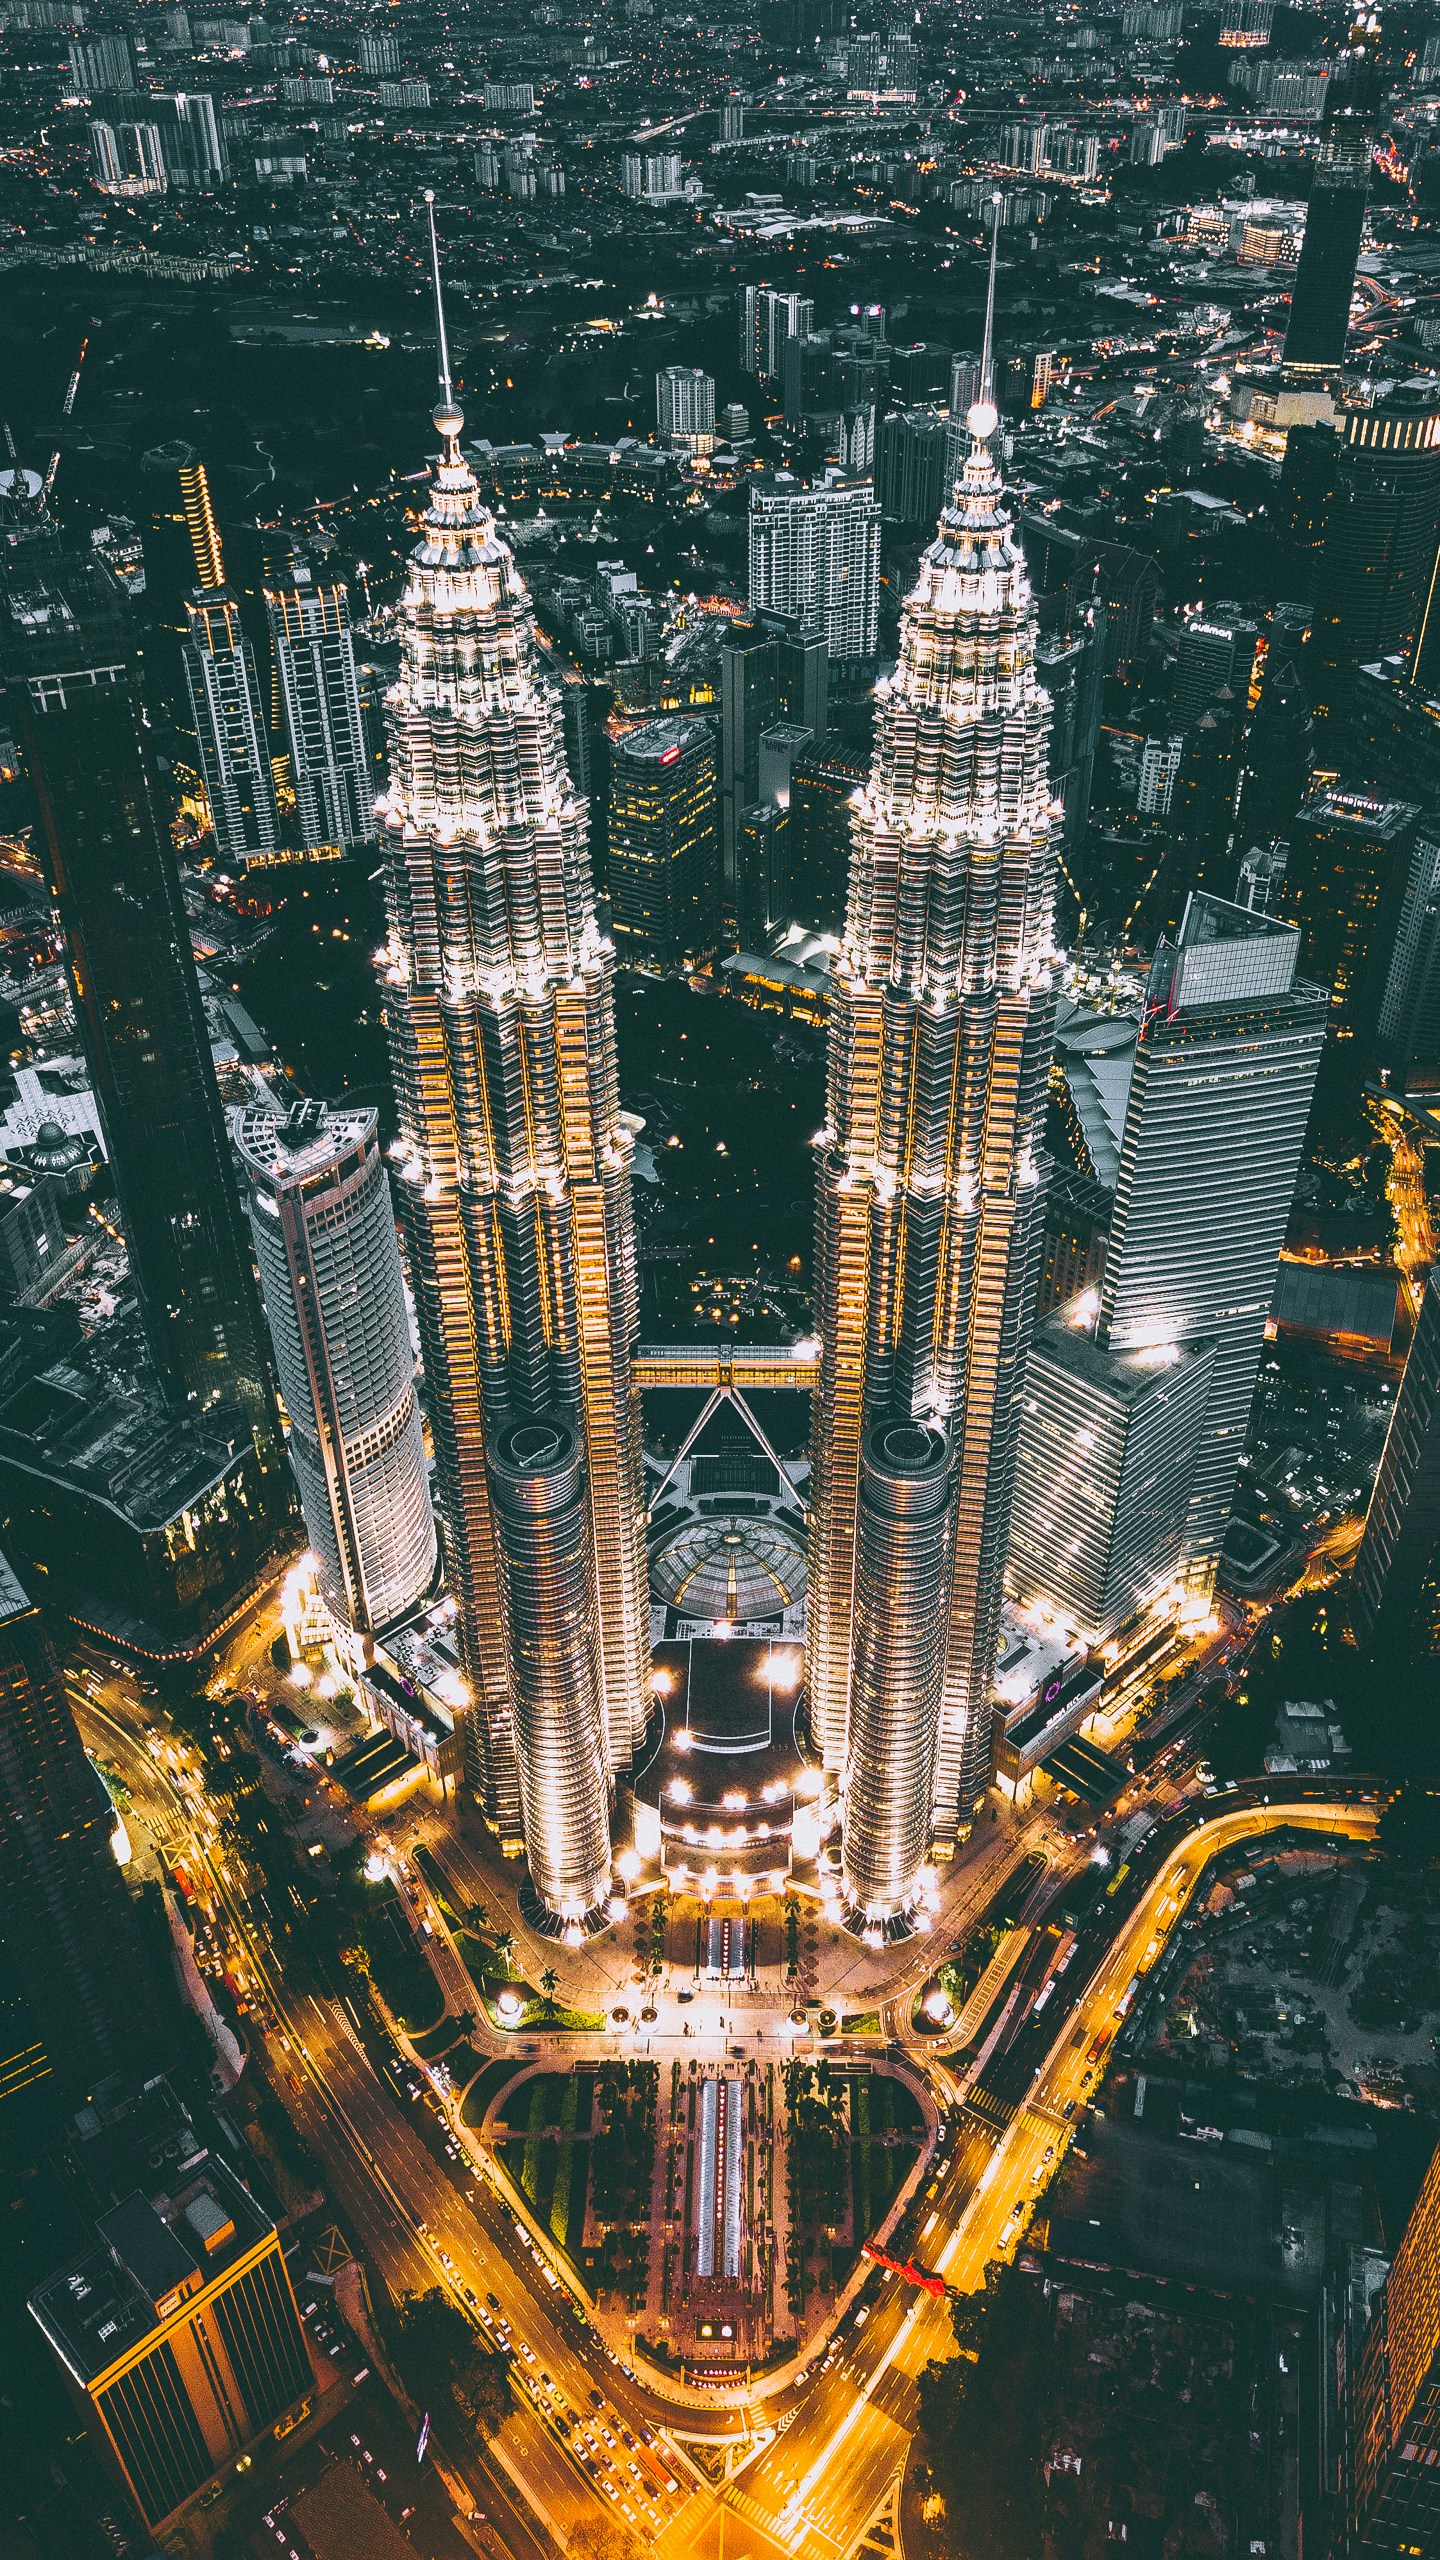 We were looking for some nice photos of KLCC Tower during sunset, but unfortunately there are a lot of clouds on that day. So we’re doing a quick portrait shot of KLCC from DJI Mavic. It’s on around 7:00PM.